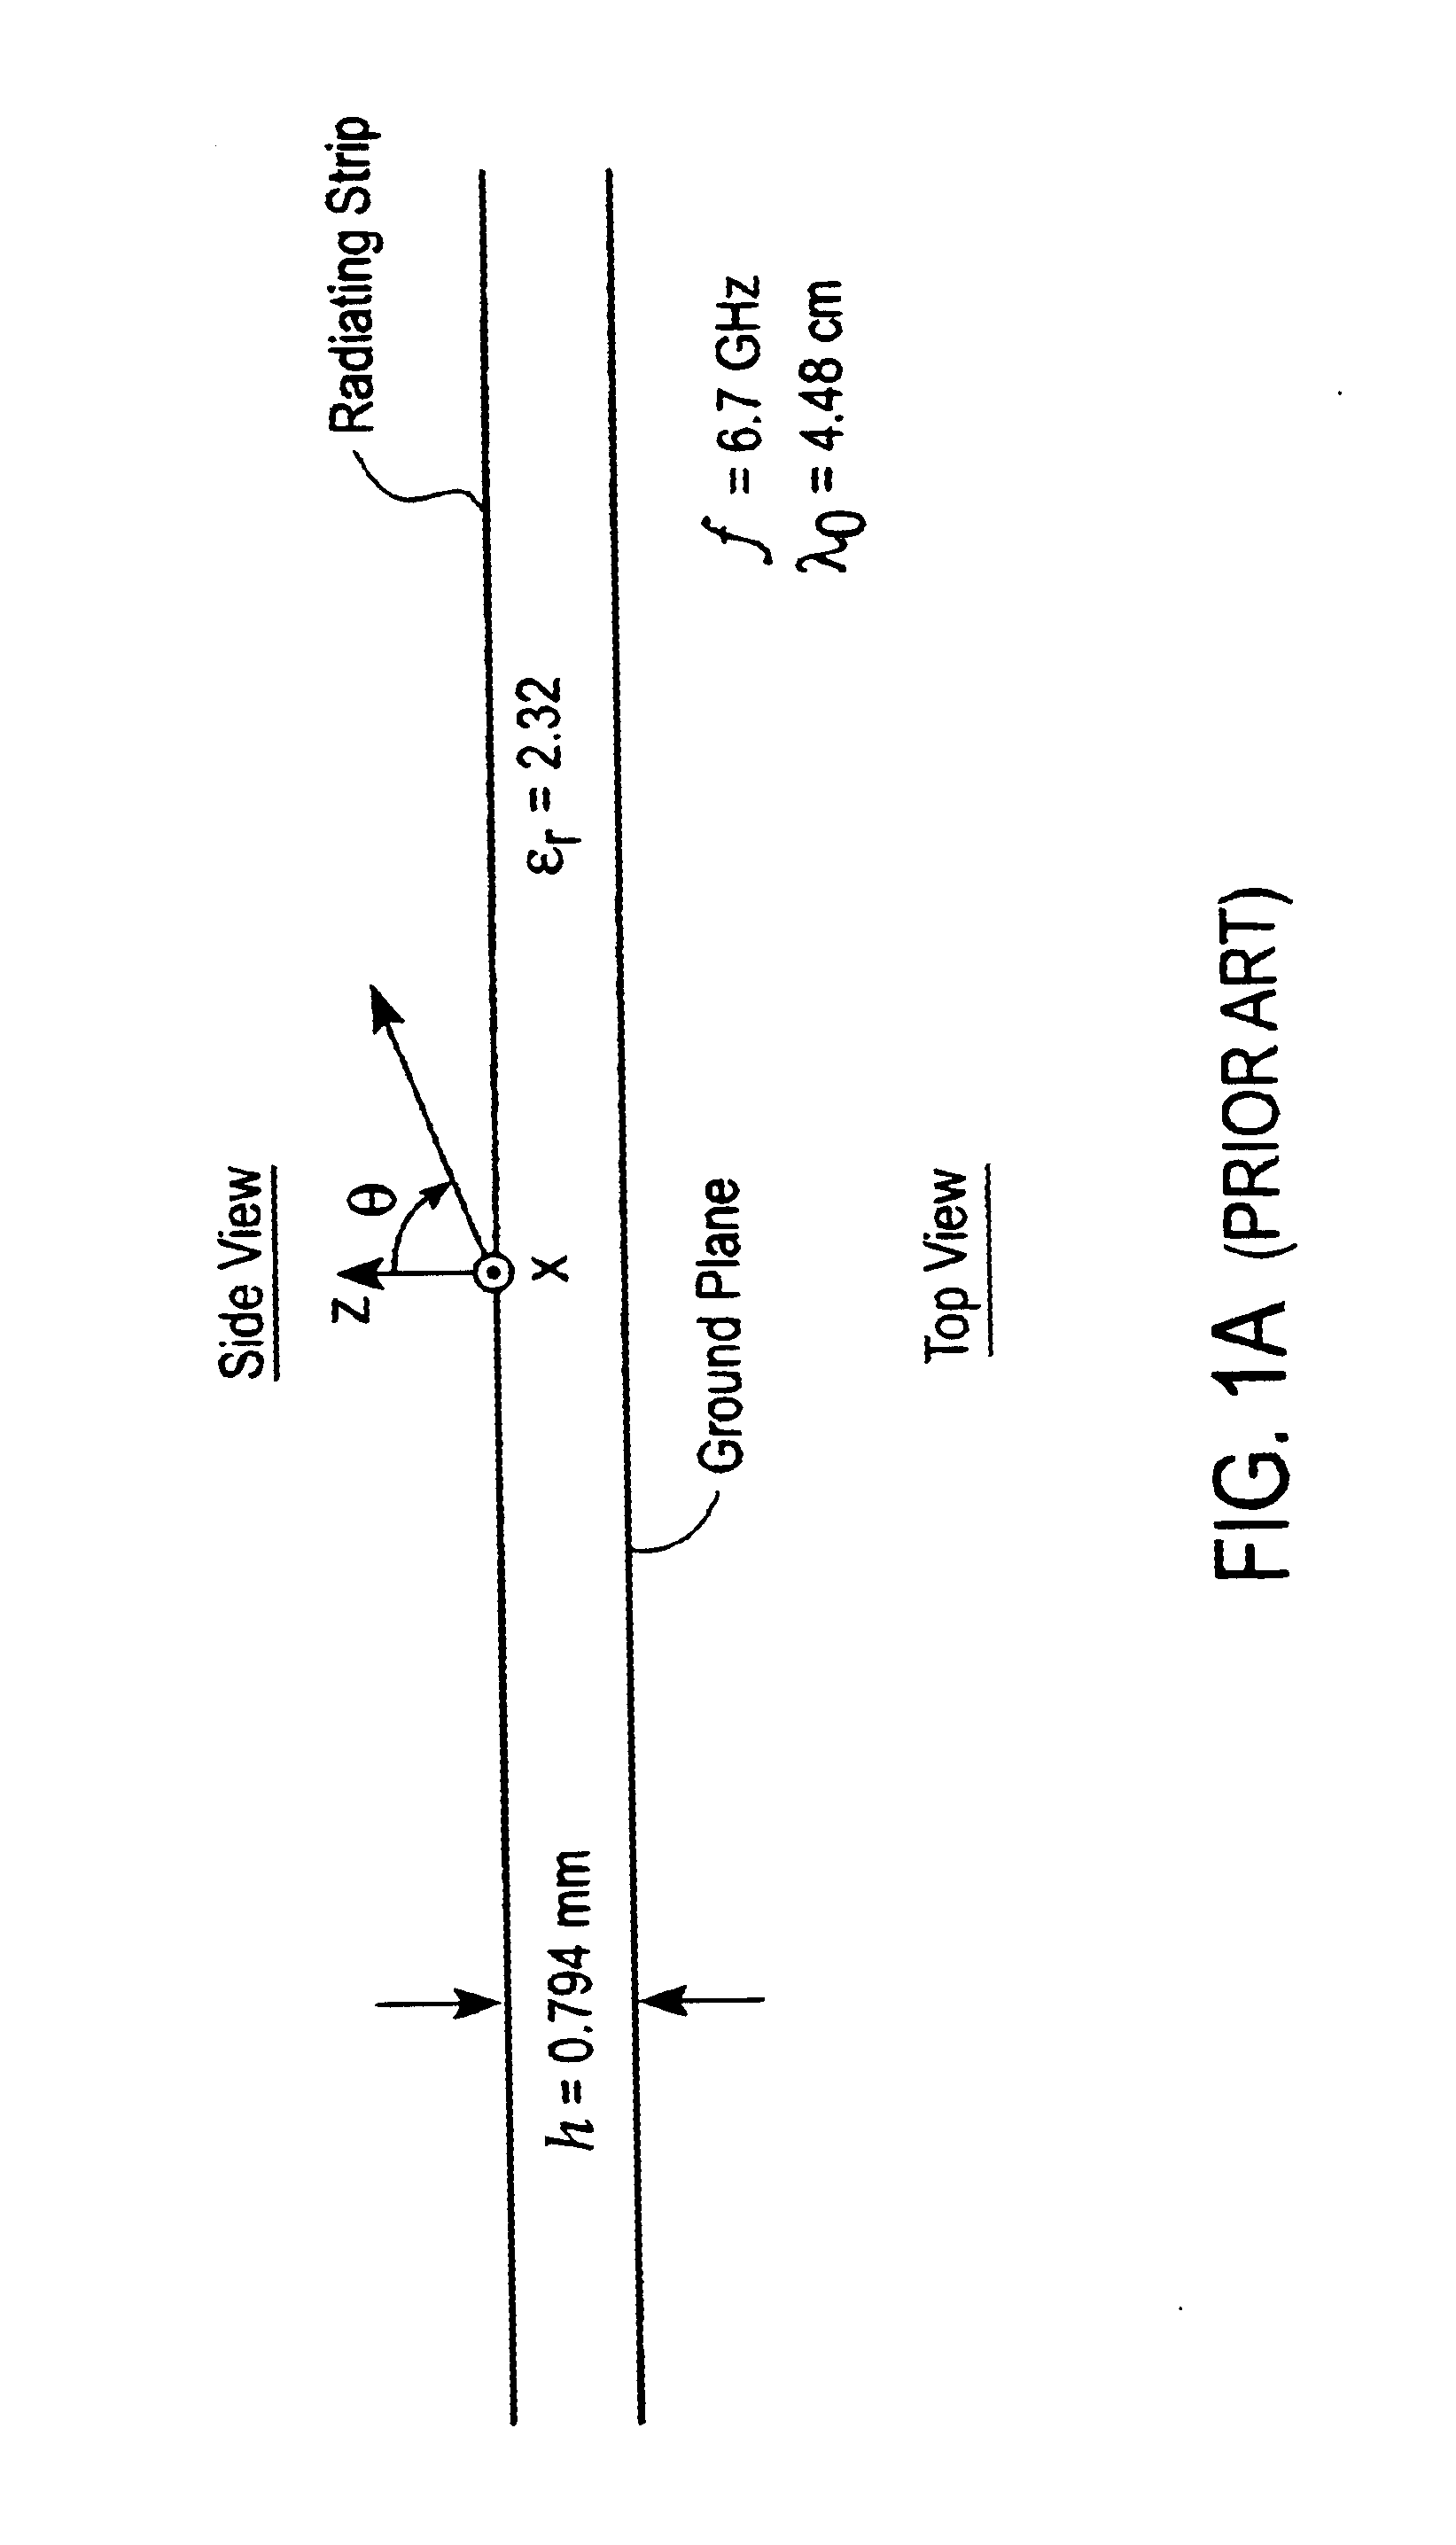 Leaky wave microstrip antenna with a prescribable pattern